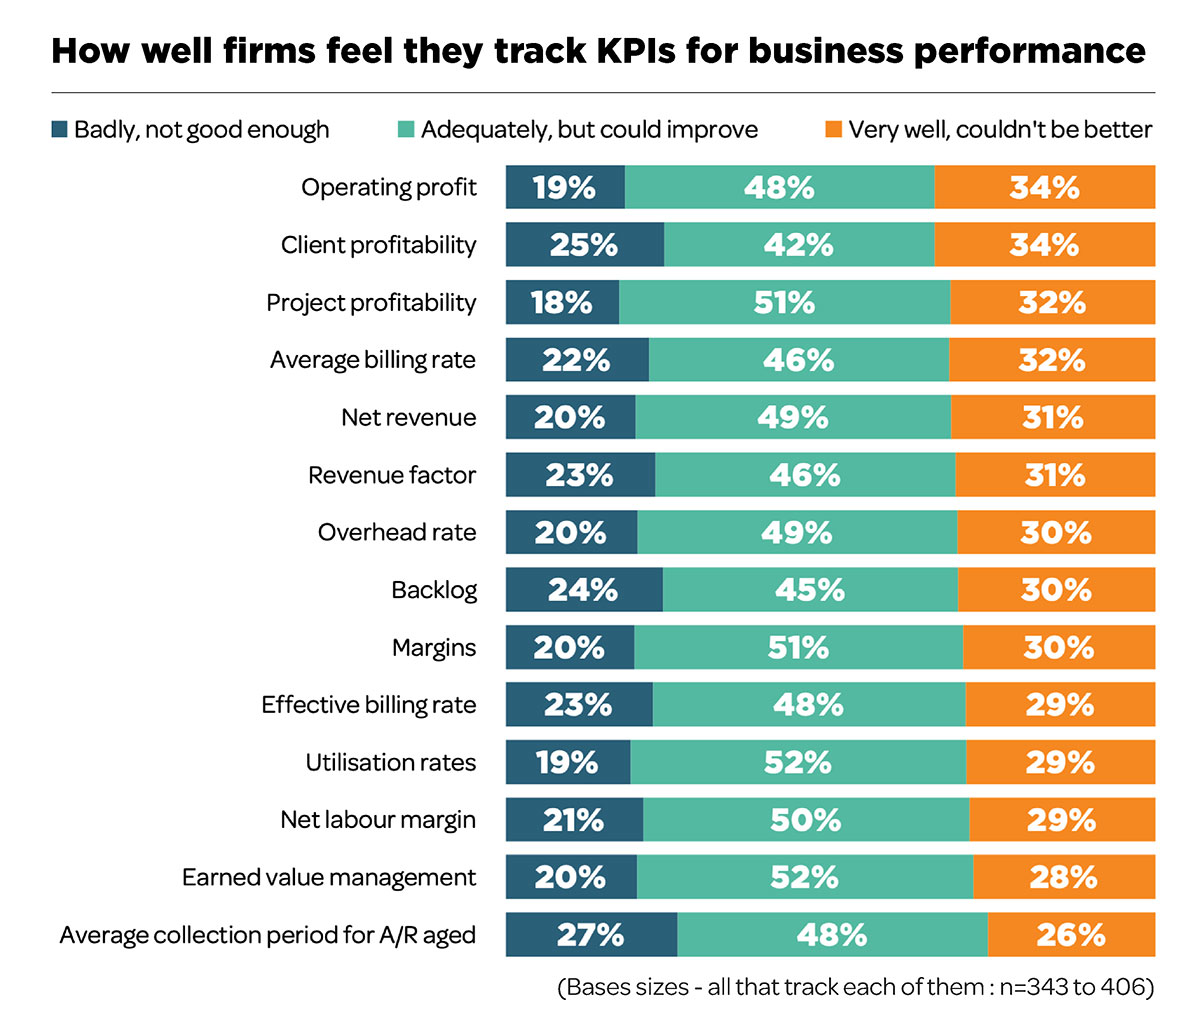 Firms believe that they could improve how well they track KPIs